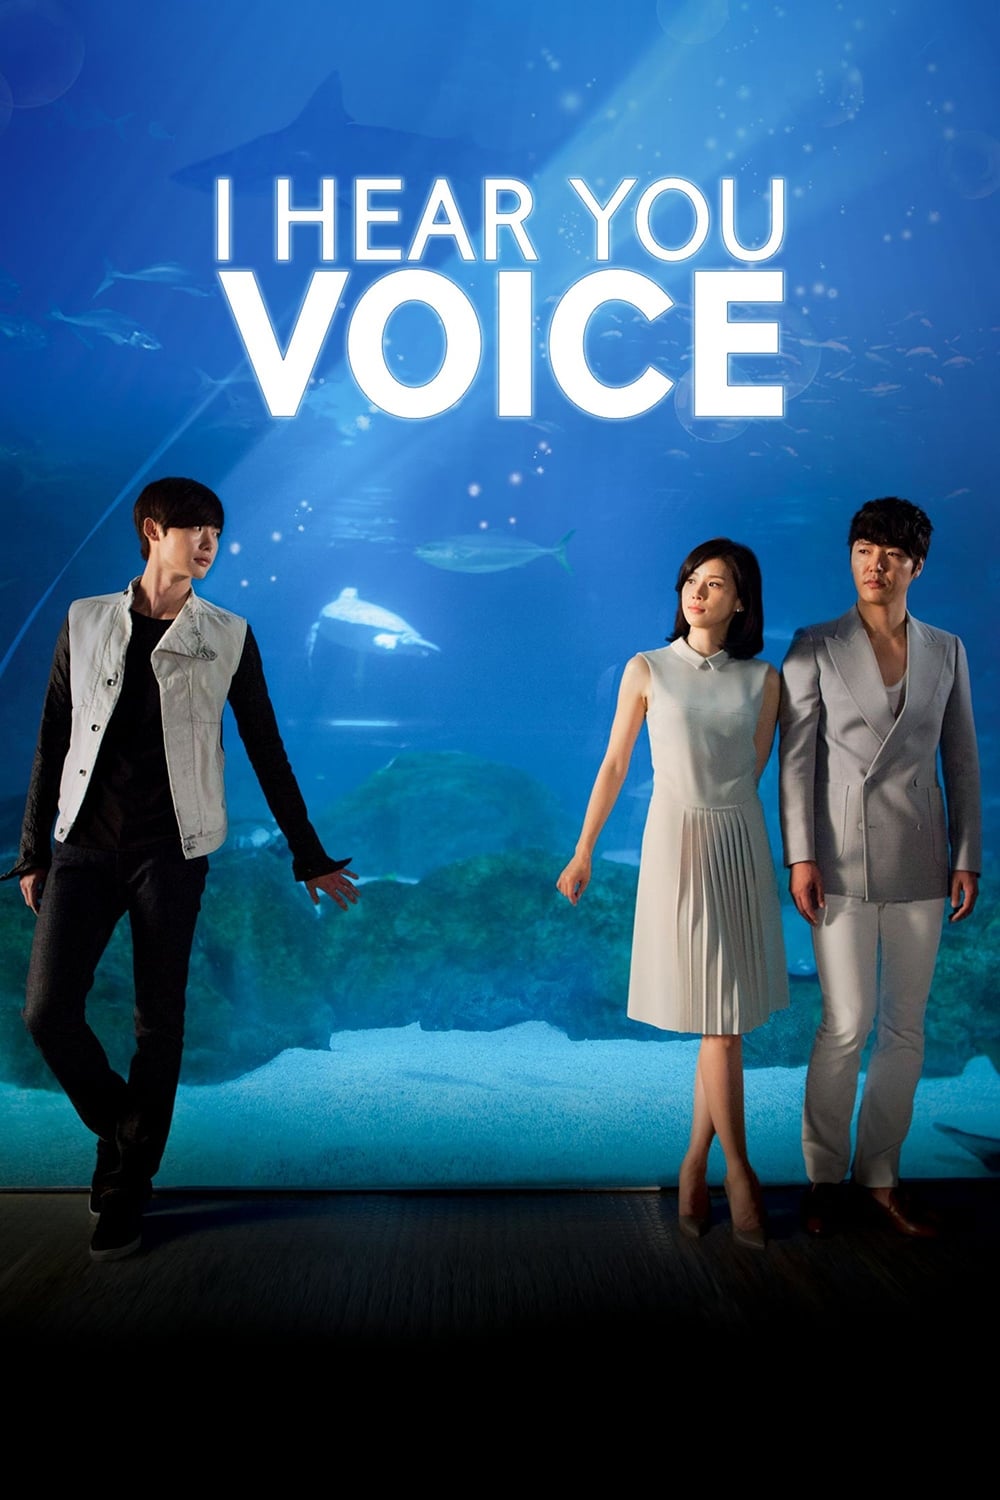 i can hear your voice cast list by appearance